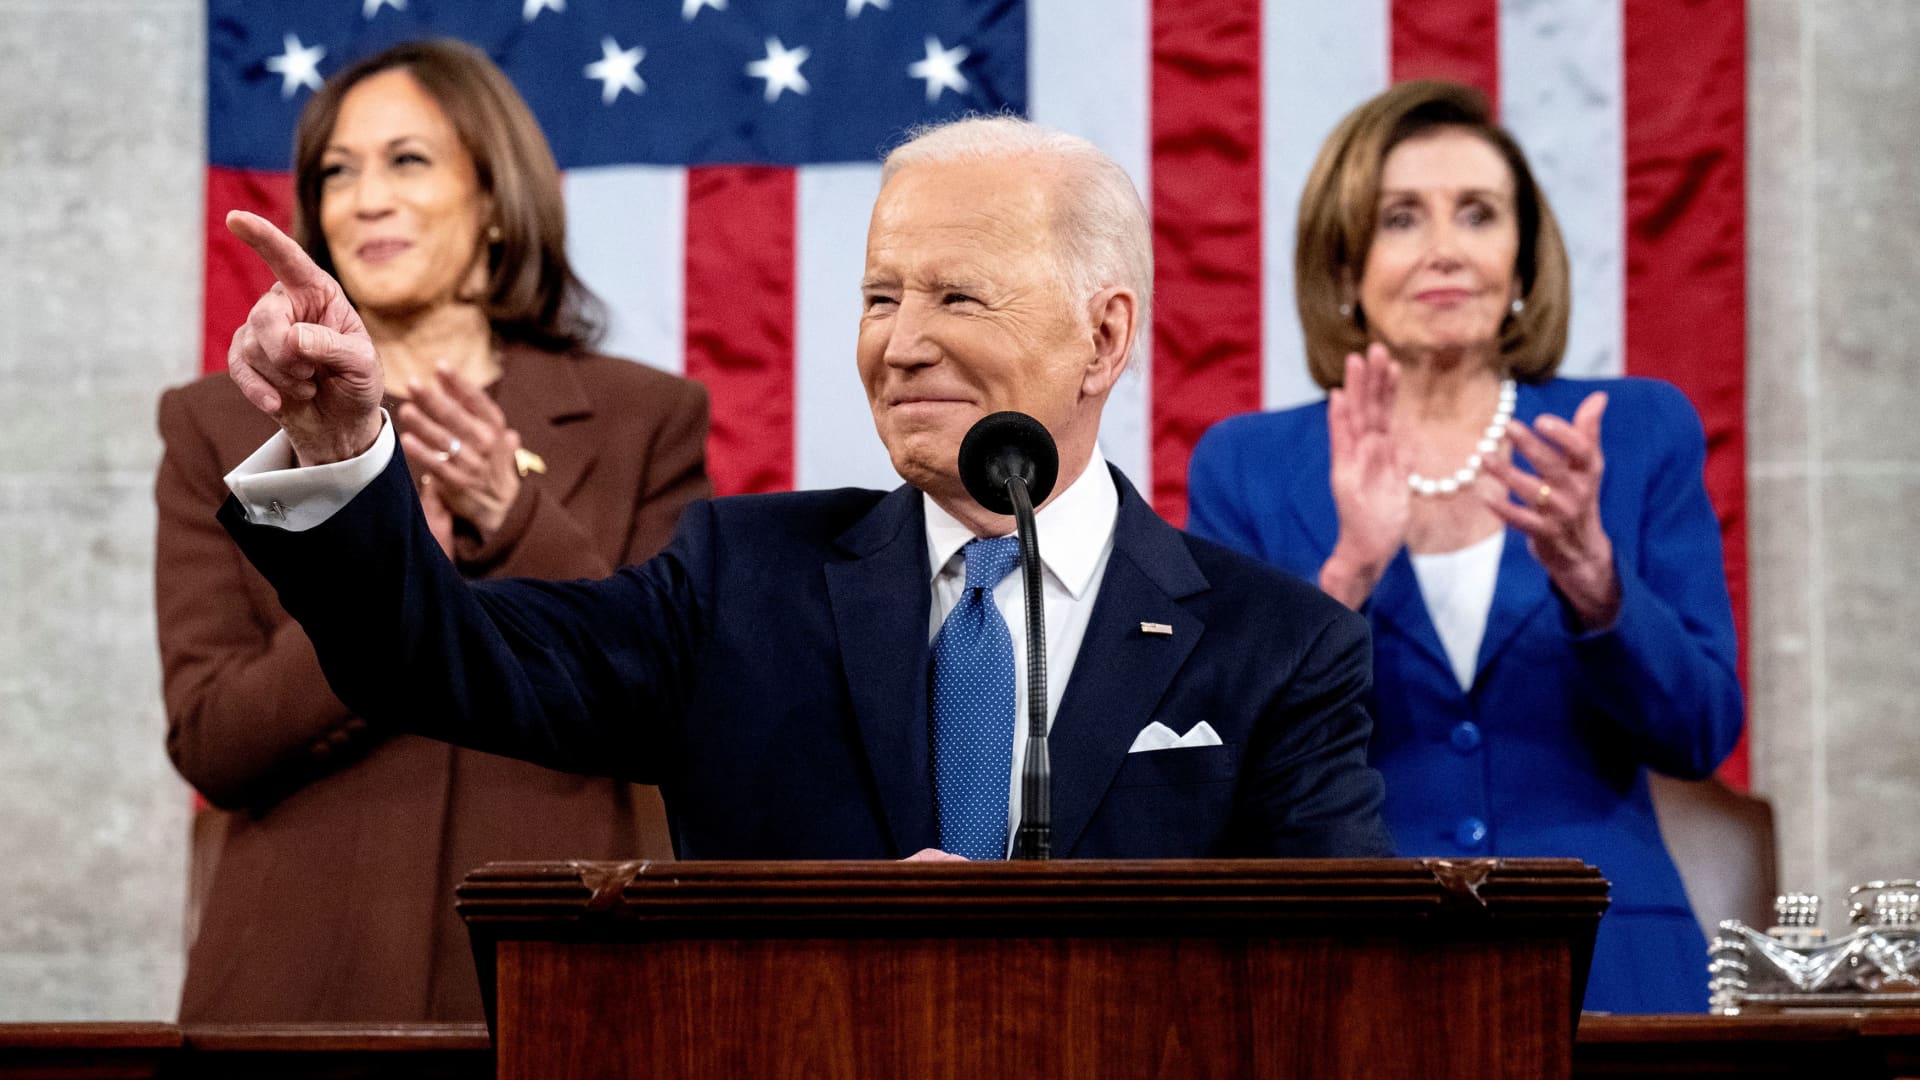 State of the Union live updates: Biden faces stubbornly high inflation and divided Congress in annual address - CNBC : U.S. job growth, the war in Ukraine, domestic manufacturing, the ongoing pandemic and America's strategic competition with China will dominate tonight's speech.  | Tranquility 國際社群